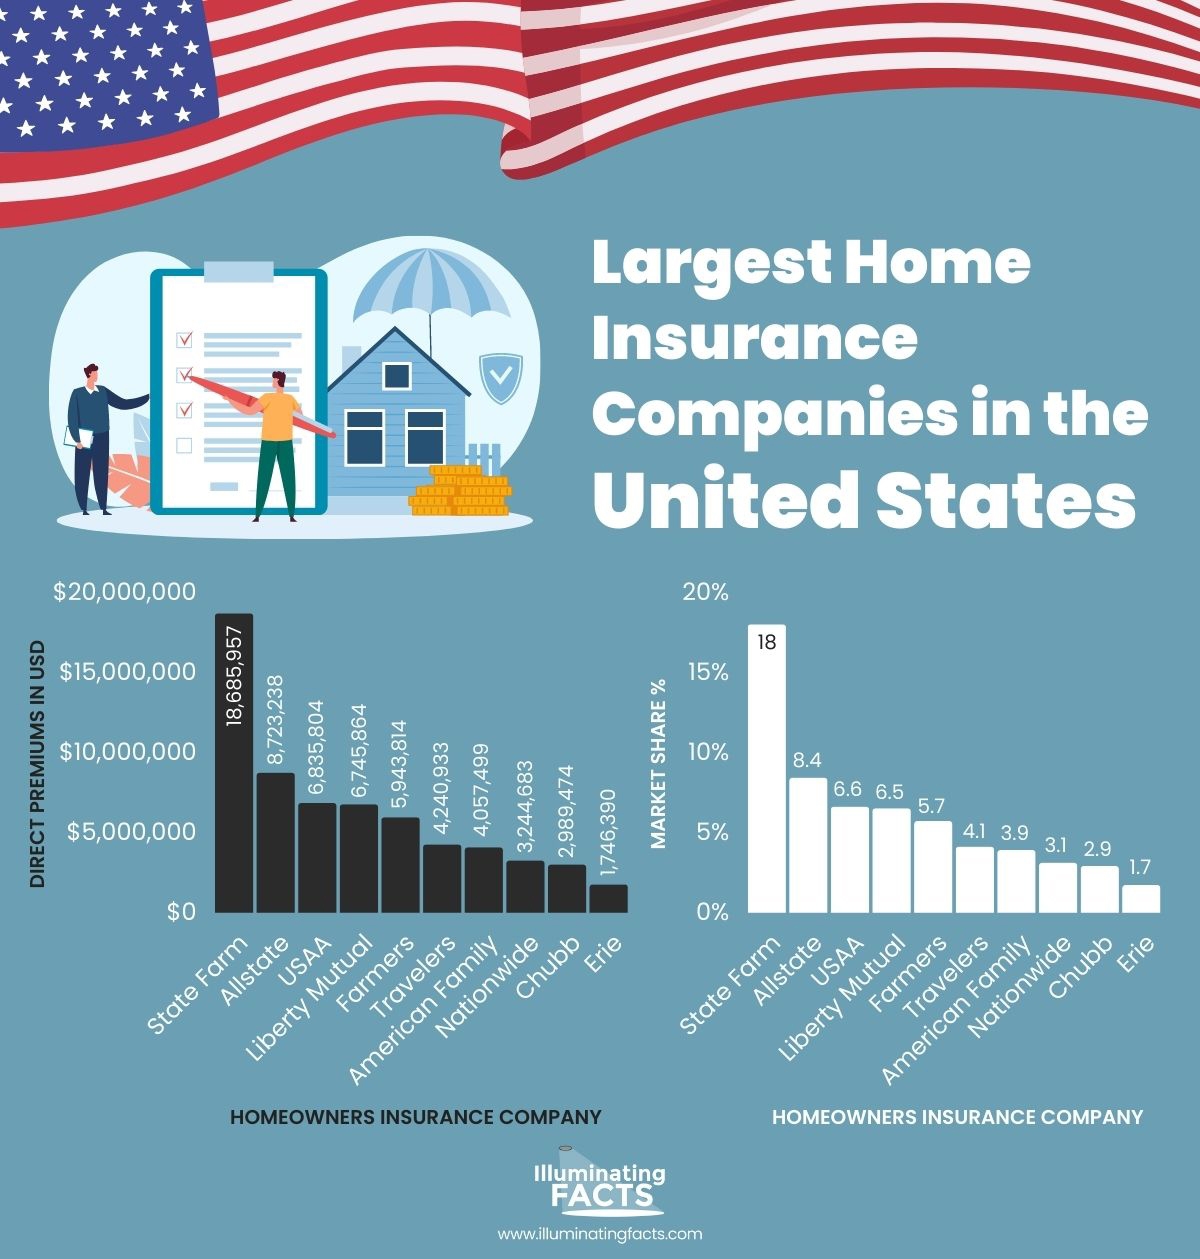 Largest Home Insurance Companies in the United States